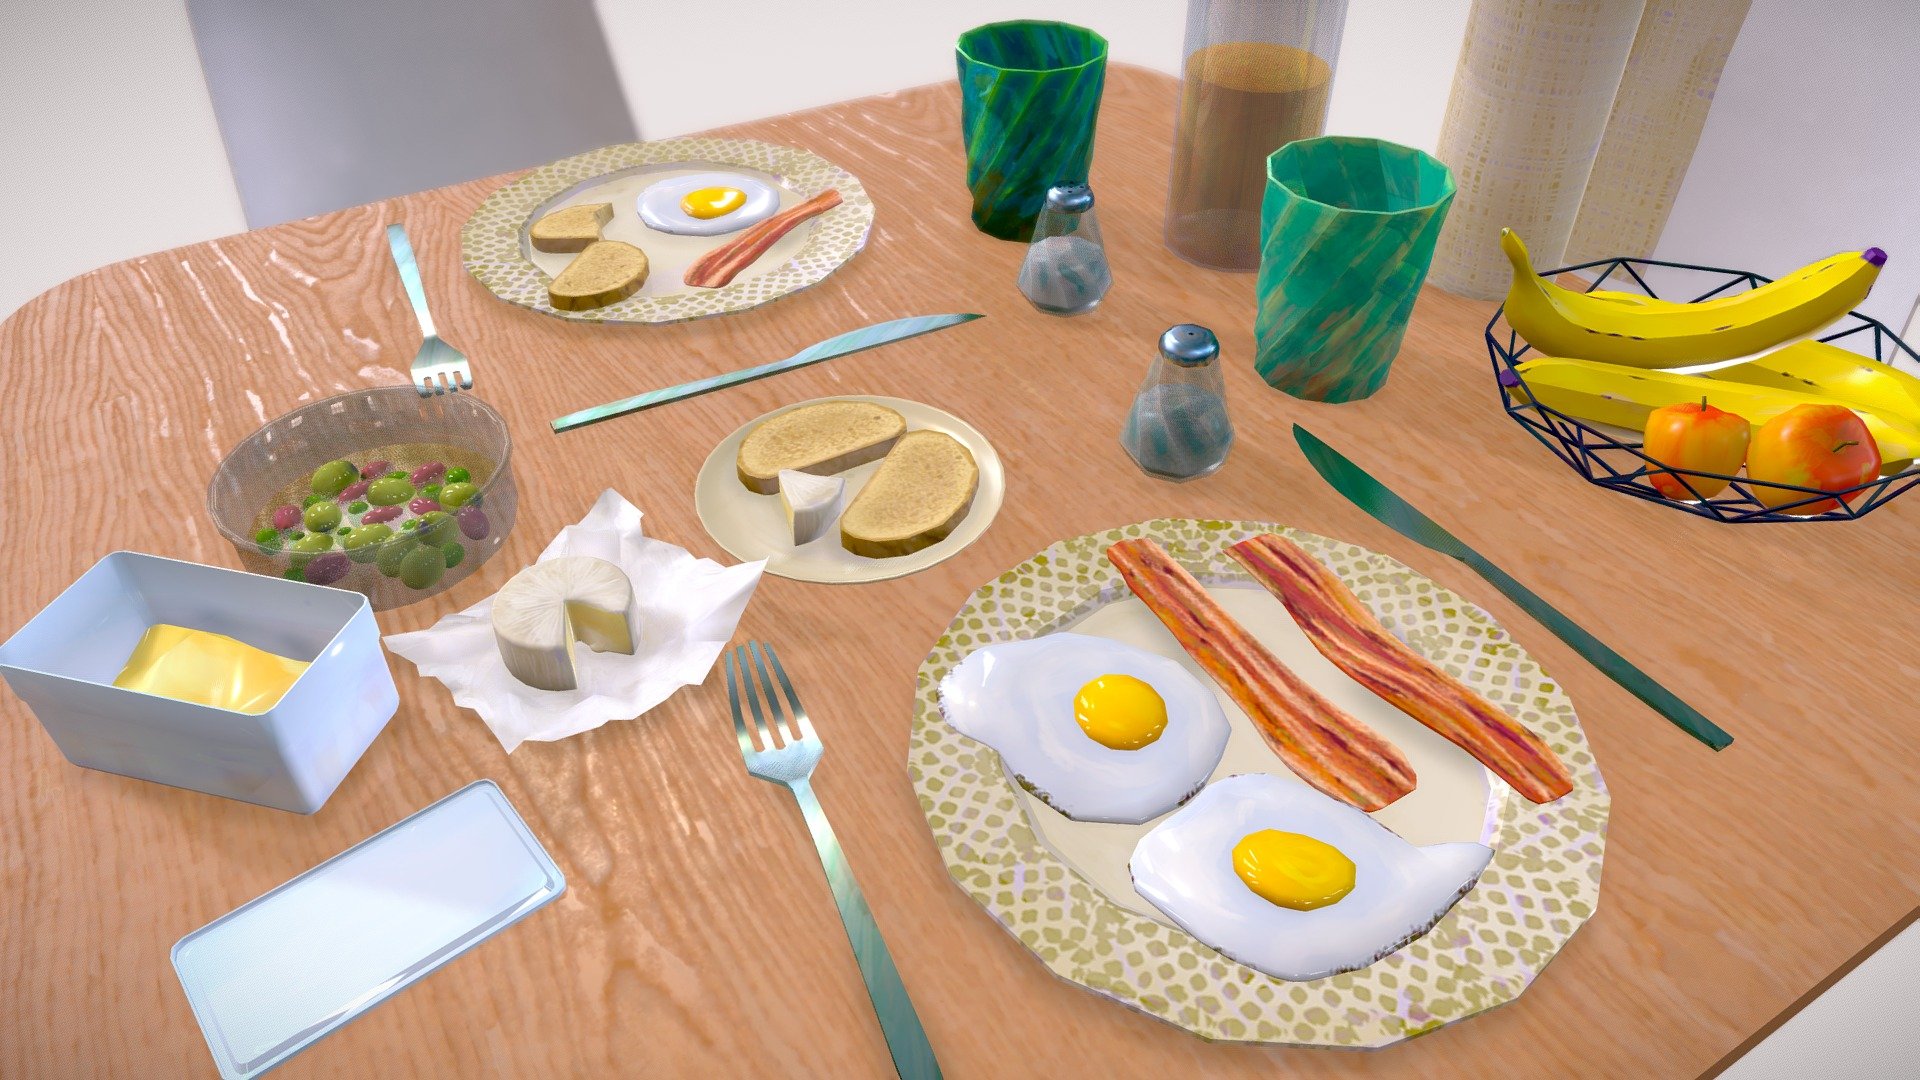 Actual footage from my kitchen on a regular morning.
No normal maps or generative maps, just handpaint.
Game ready. Mesh is quite optimized.
Textures are not because there are other objects not present in the file. For texture/uv optimization I recommend a repack and texture transfer bake 3d model